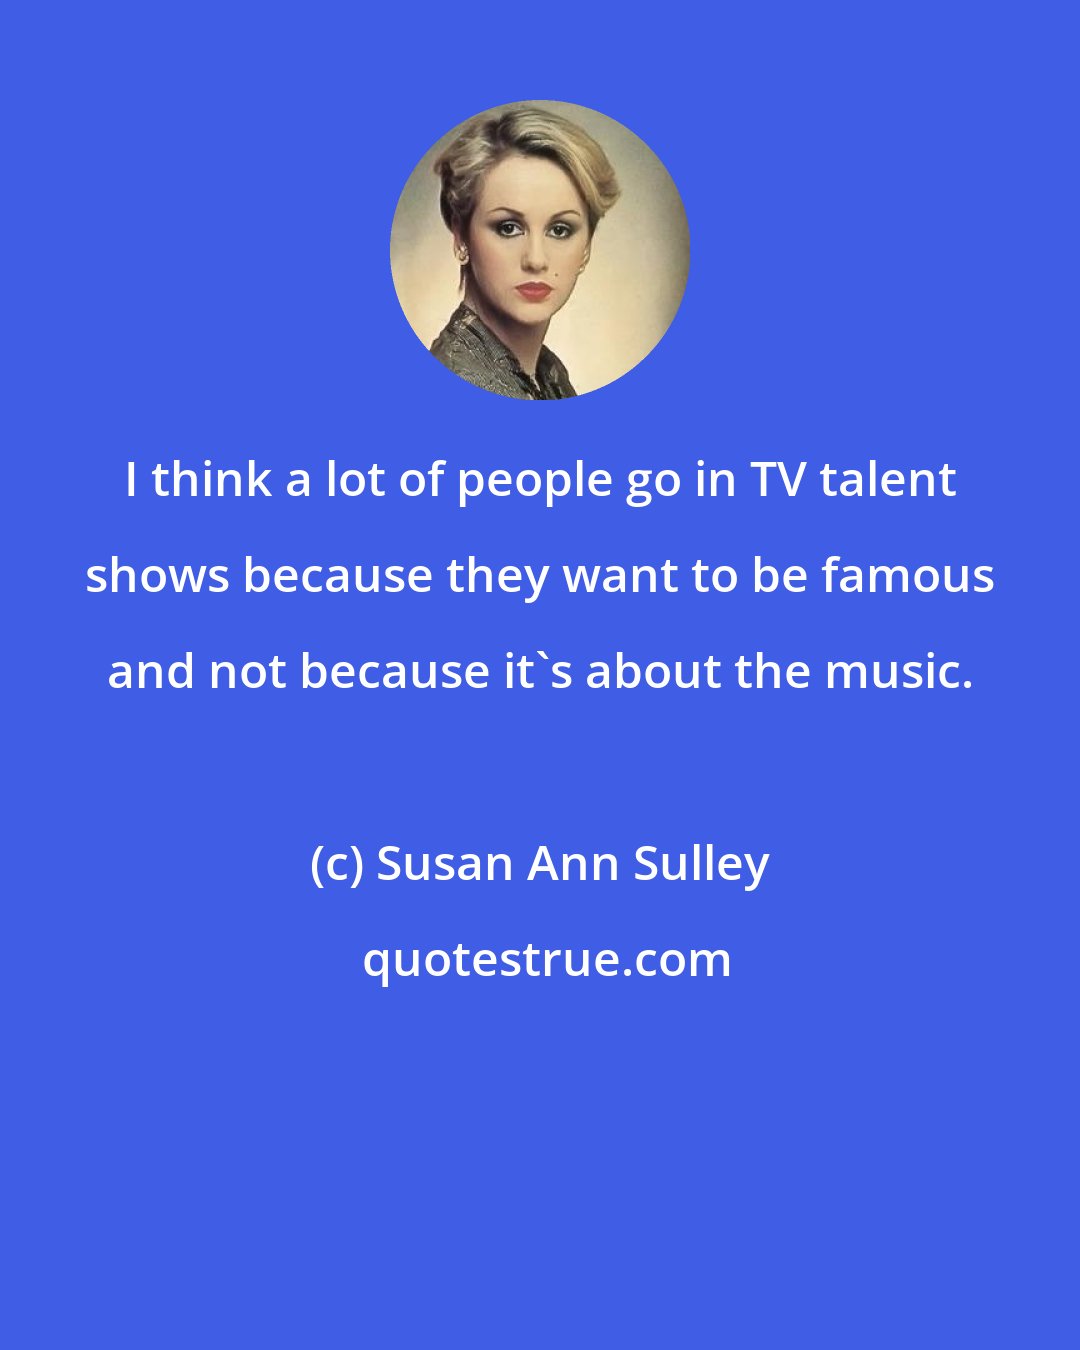 Susan Ann Sulley: I think a lot of people go in TV talent shows because they want to be famous and not because it's about the music.